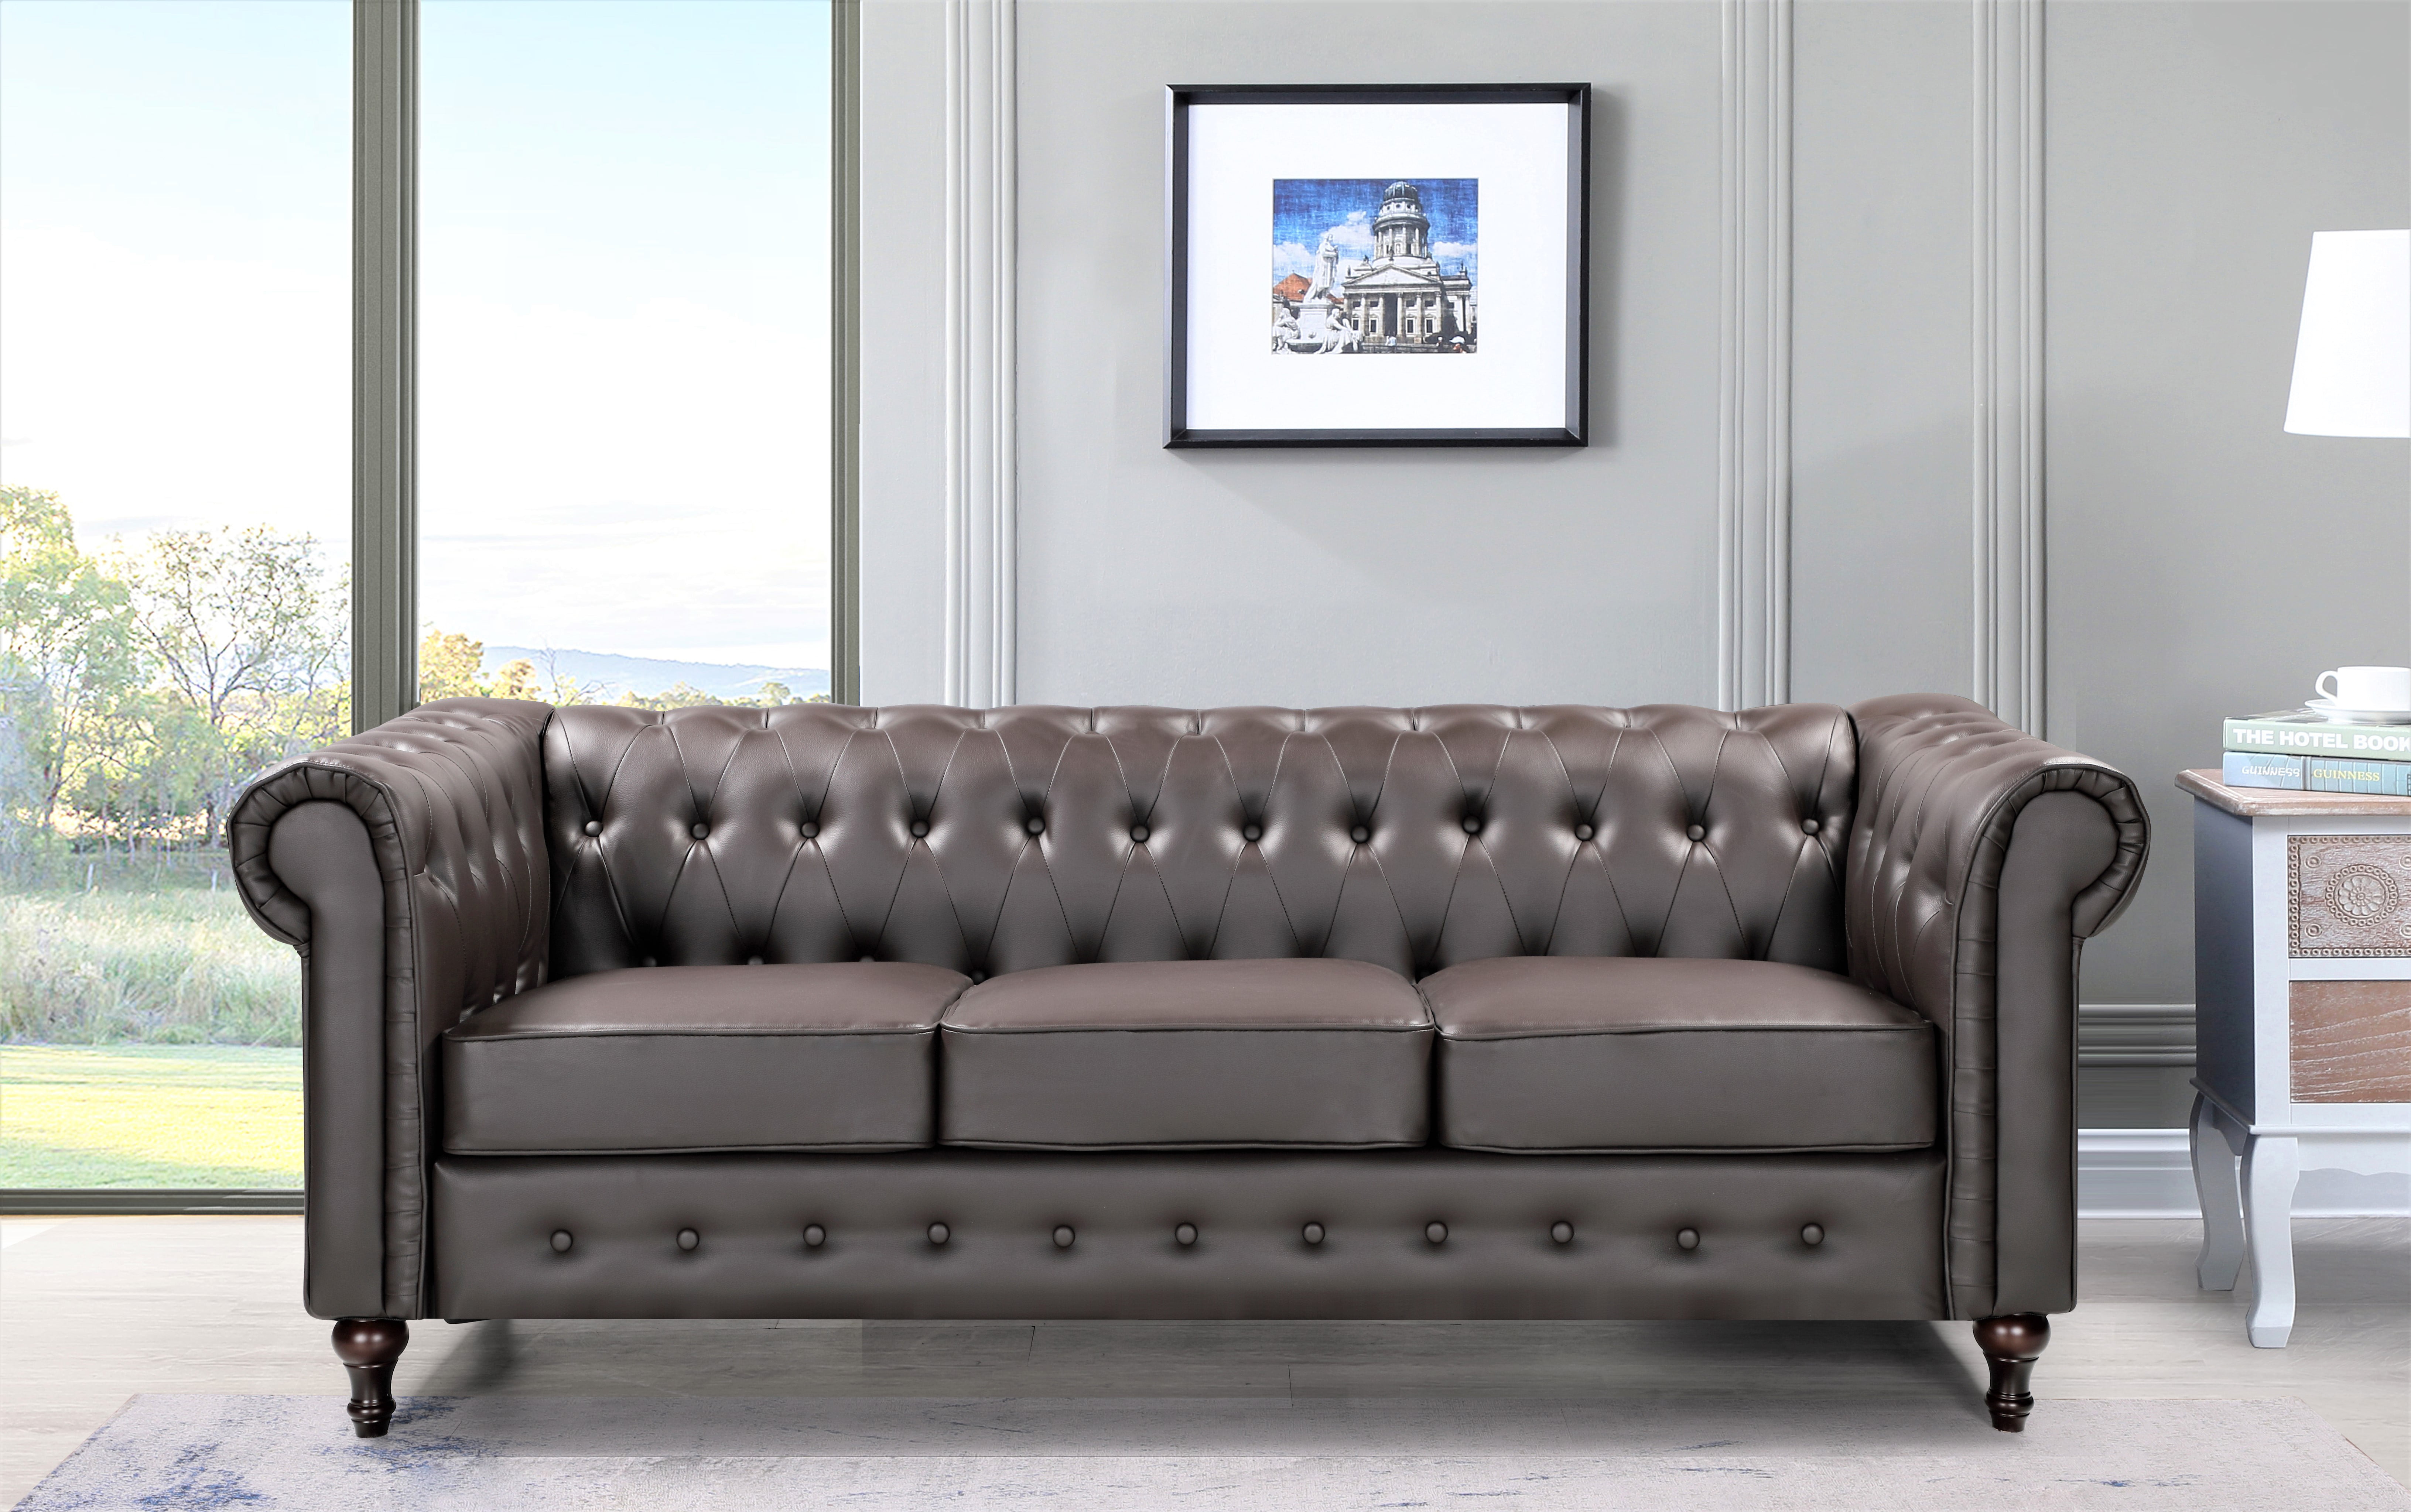 Oriskany Chesterfield Faux Leather Sofa Com - Leather Sofa With Removable Seat Cushions Uk